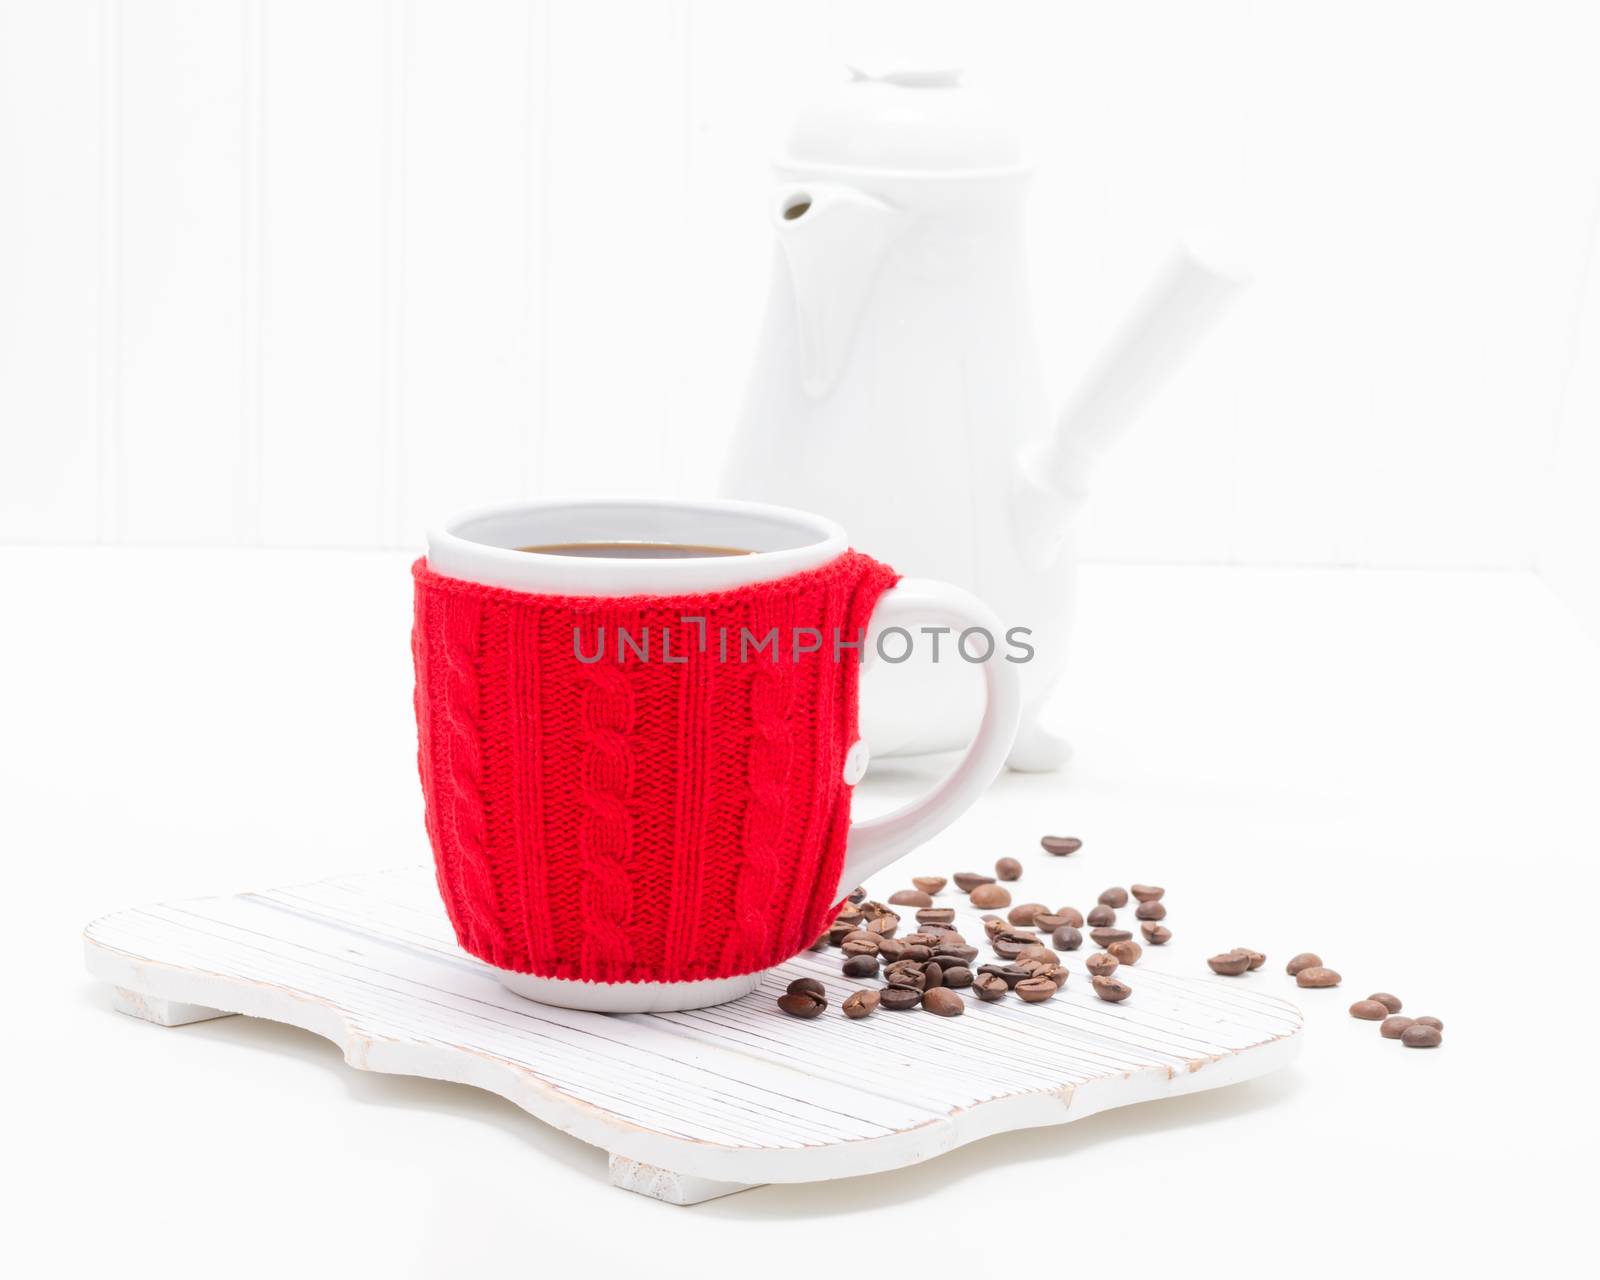 Cup of fresh brewed coffee in a cup with a bright red knitted cozy.